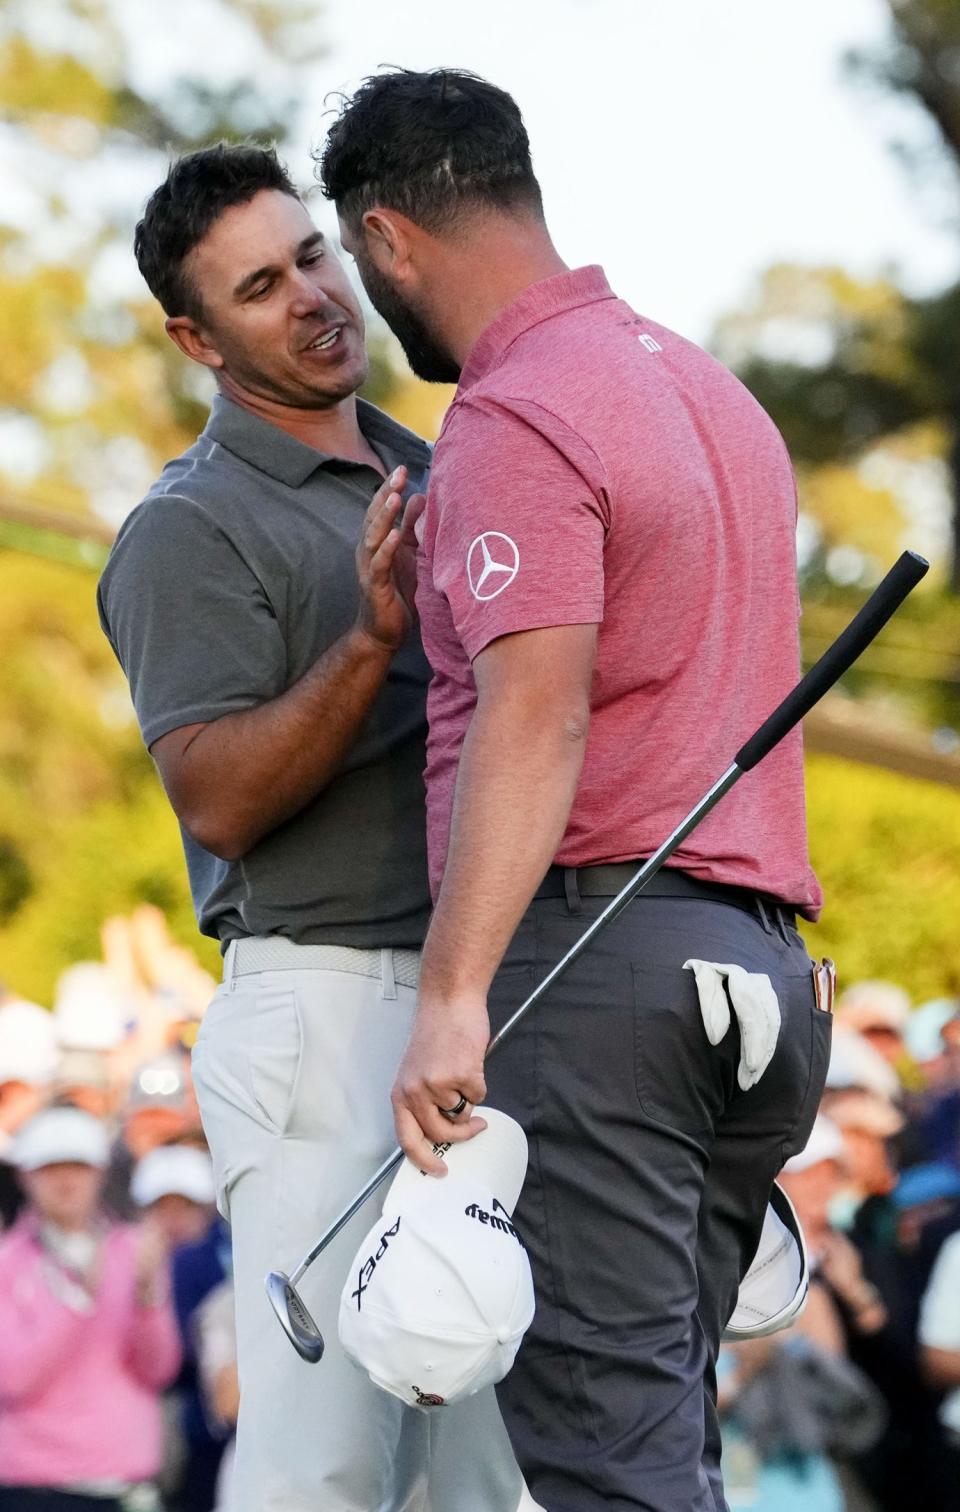 When it ended, Brooks Koepka (left) had to congratulate Jon Rahm on his Masters victory and await another chance, next month at the PGA Championship.